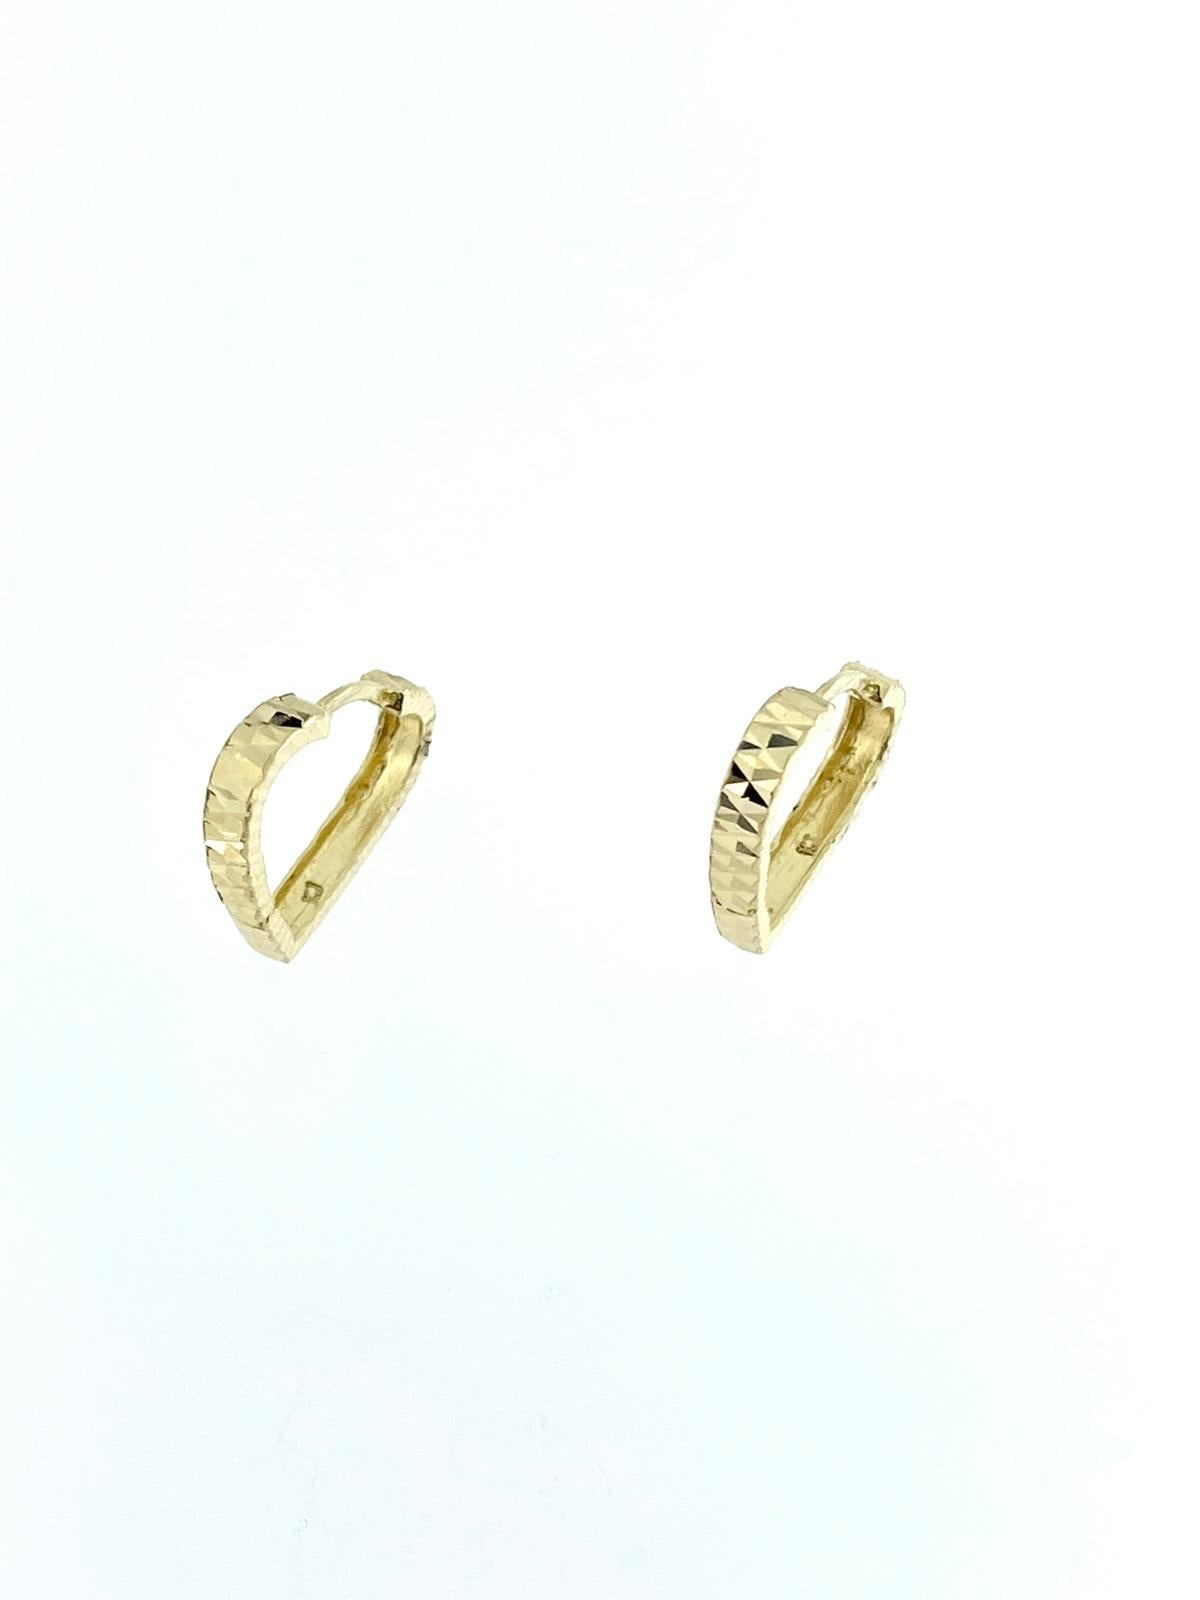 Yellow Gold Heart Shaped Hoop Earrings In Good Condition For Sale In Esch-Sur-Alzette, LU